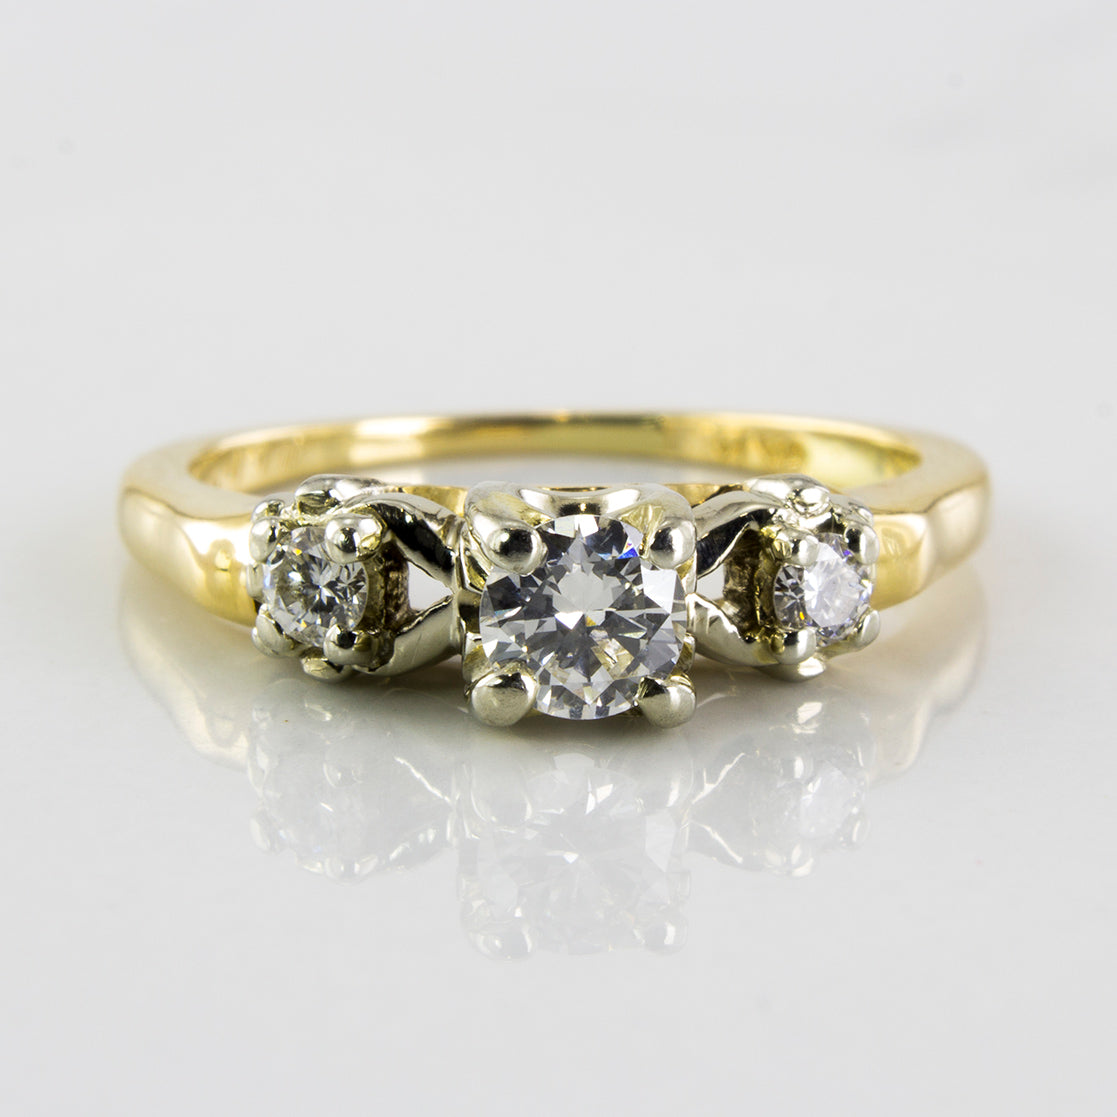 Early 1960's Three Stone Engagement Ring | 0.35 ctw | SZ 4.25 |